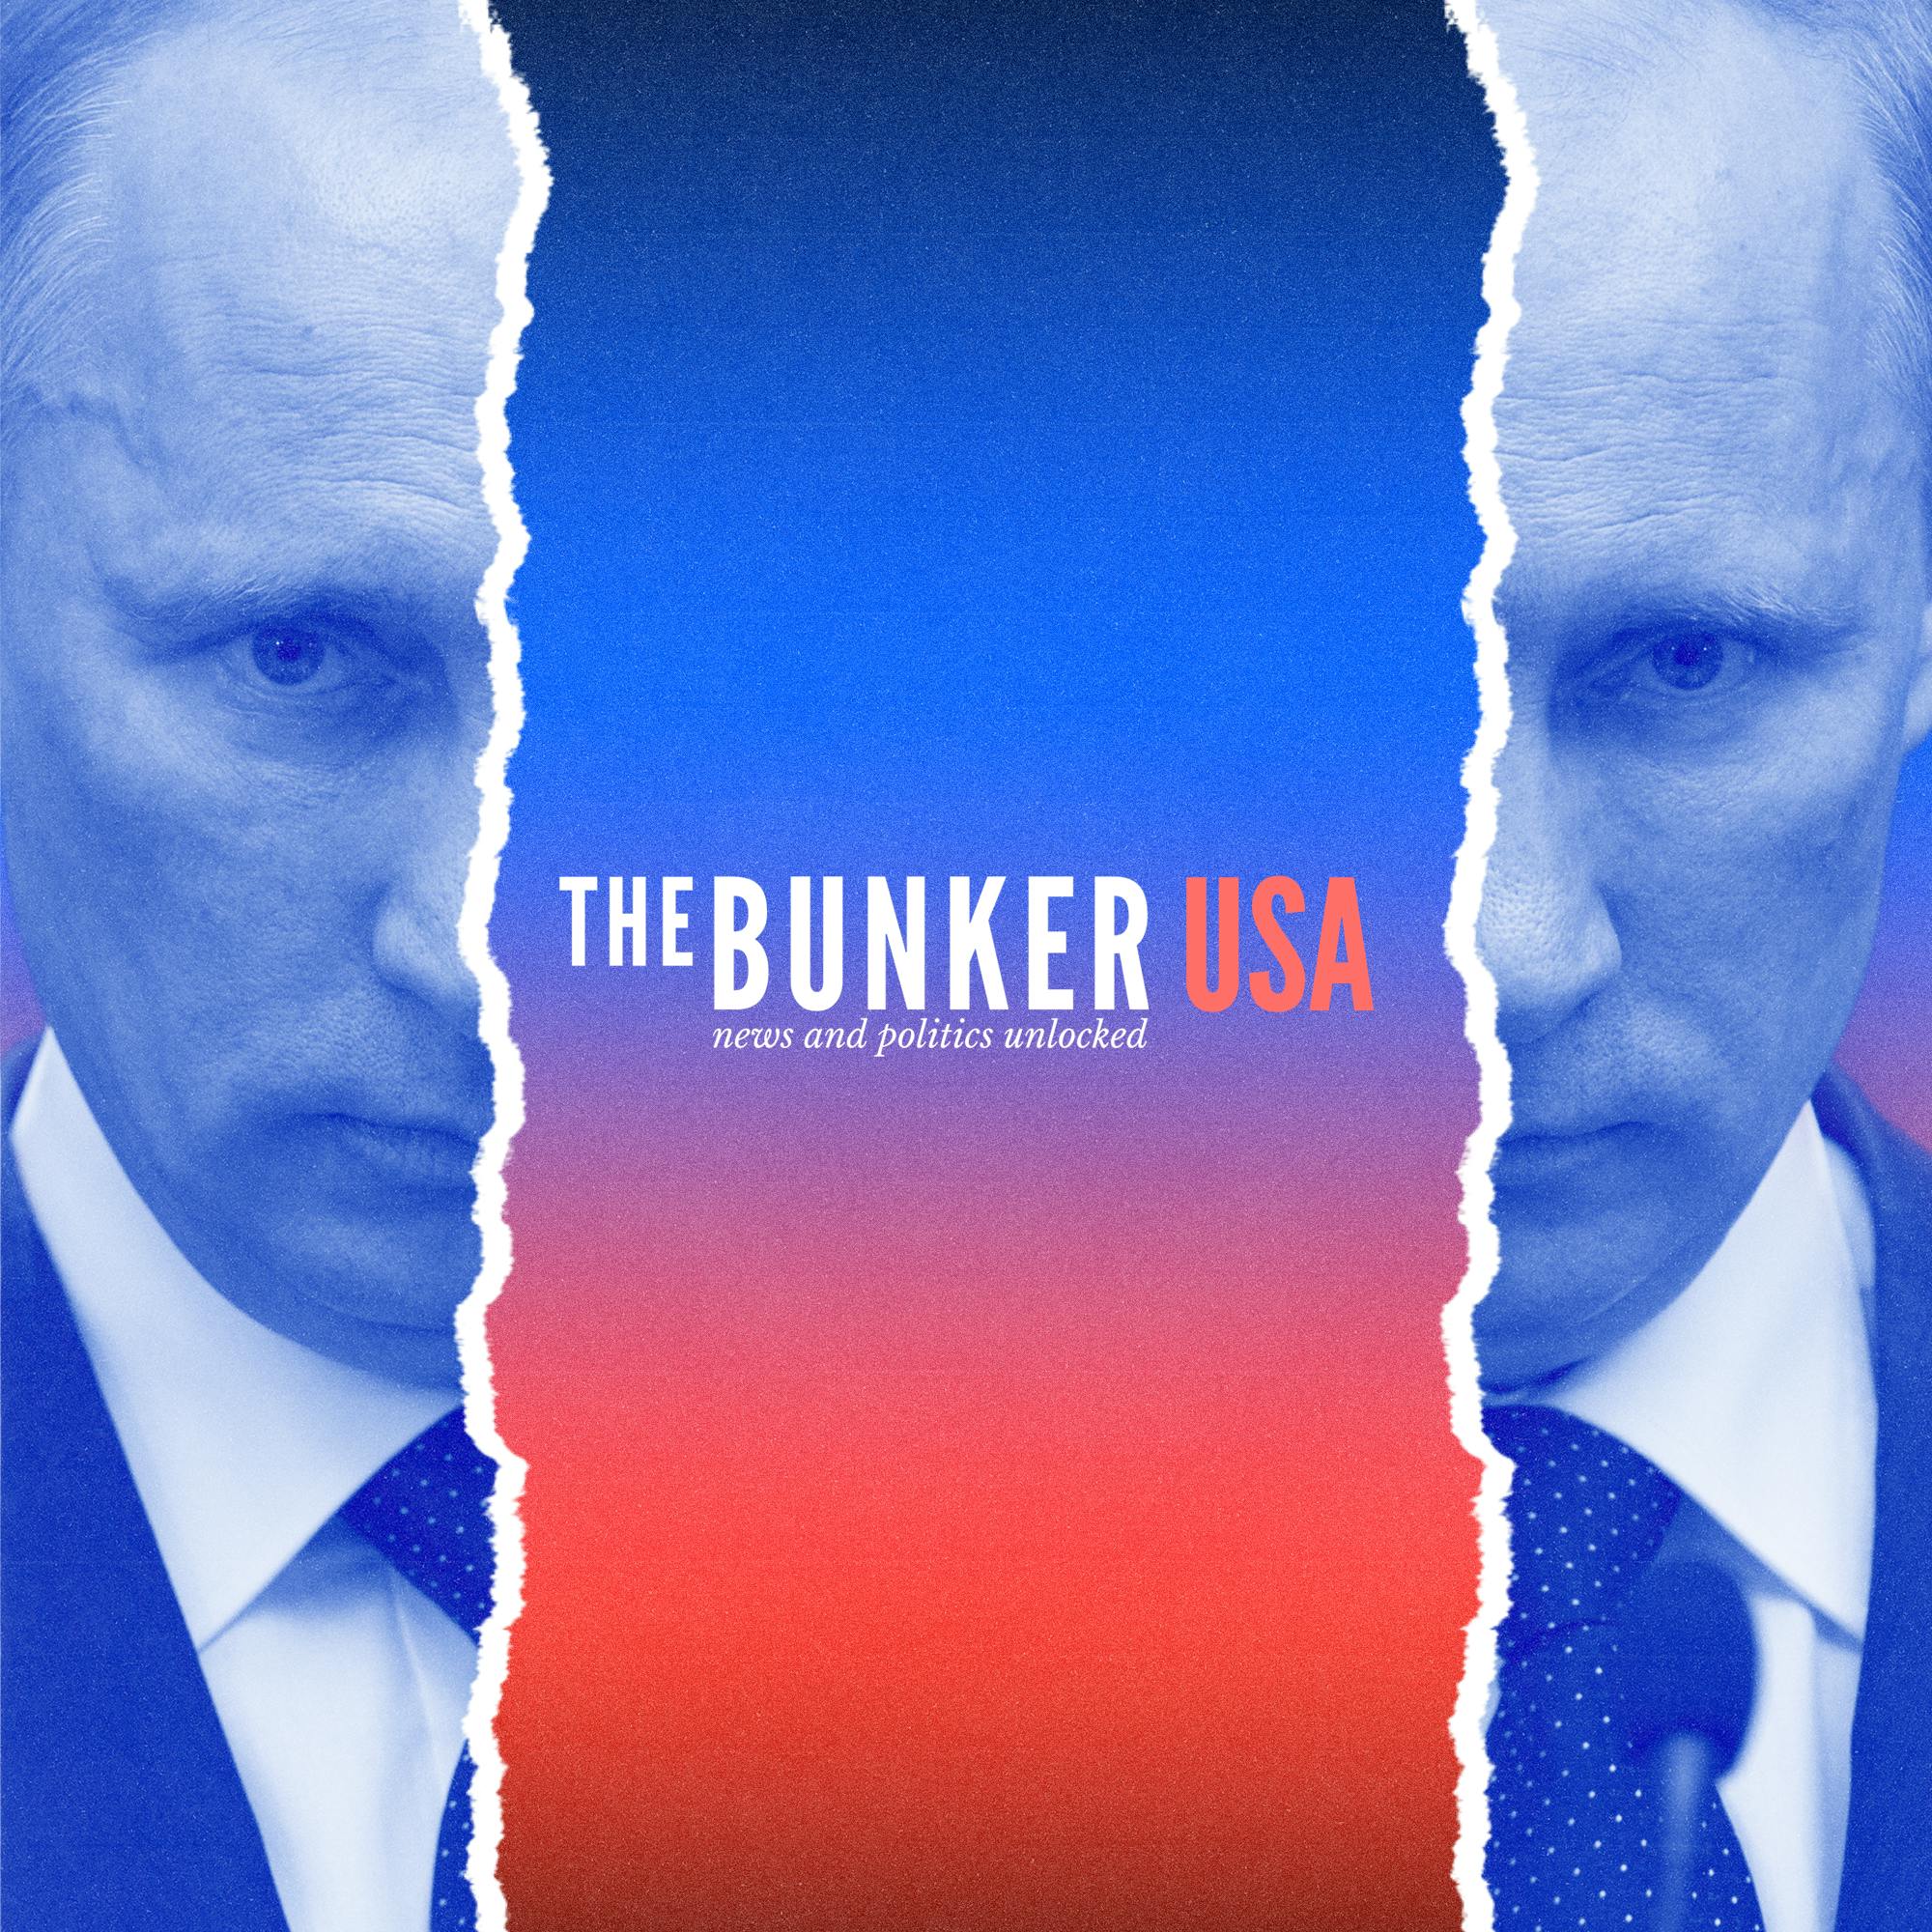 Bunker USA: Moscow Fools – Why is the Republican Party split on Russia?